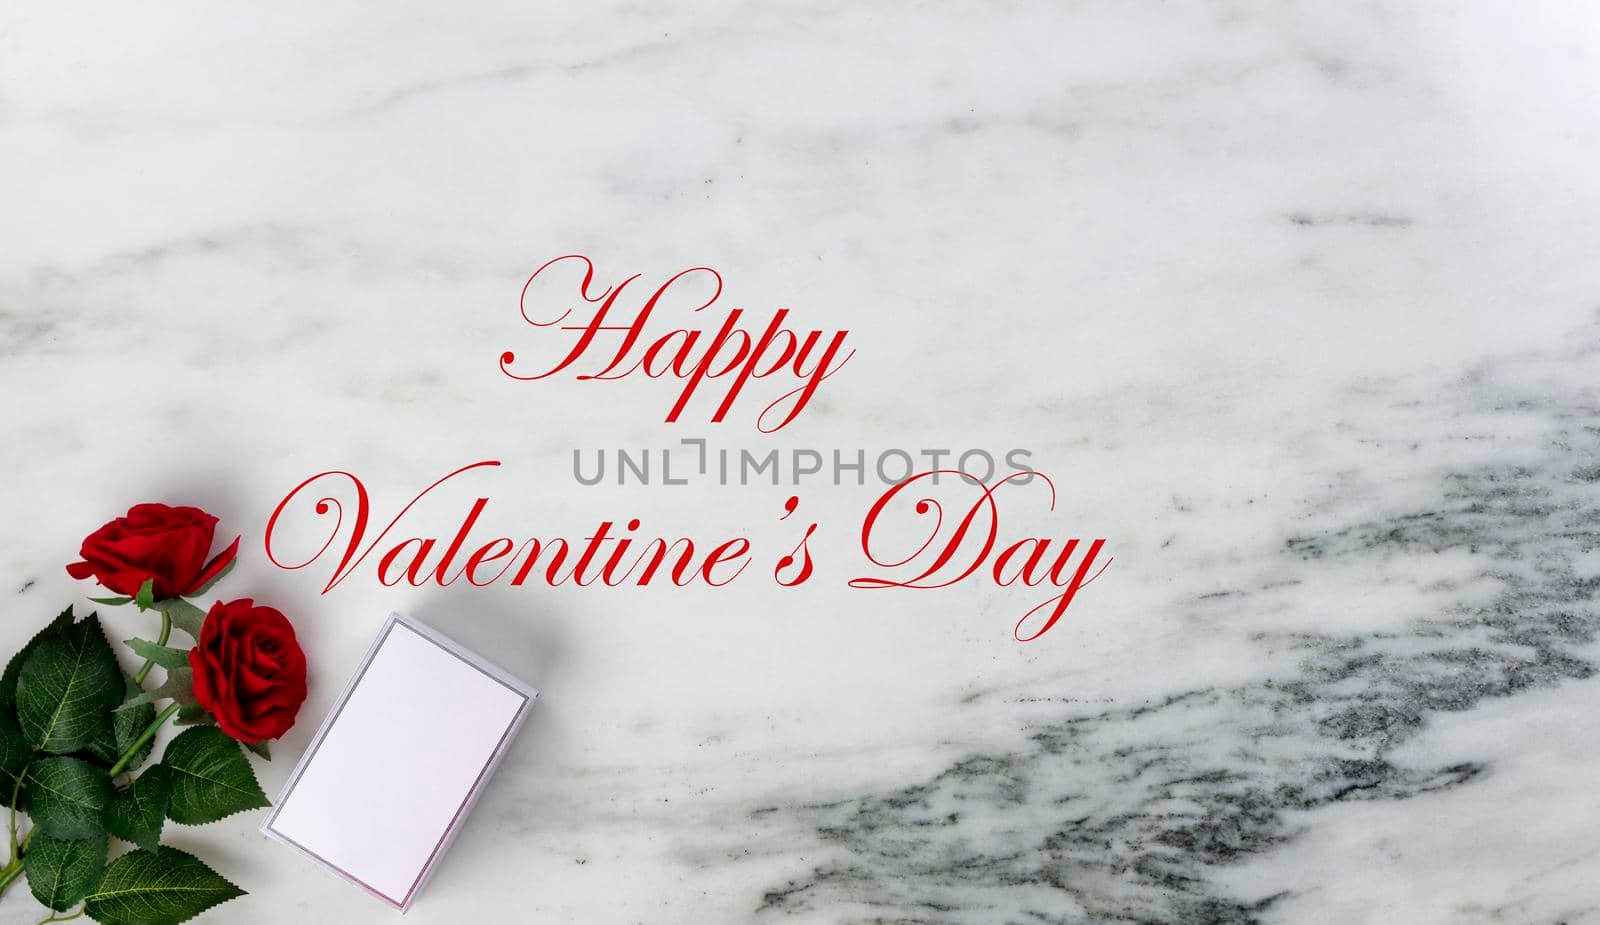 Happy Valentines Day with lovely red rose flowers and gift on natural marble stone plus text message by tab1962